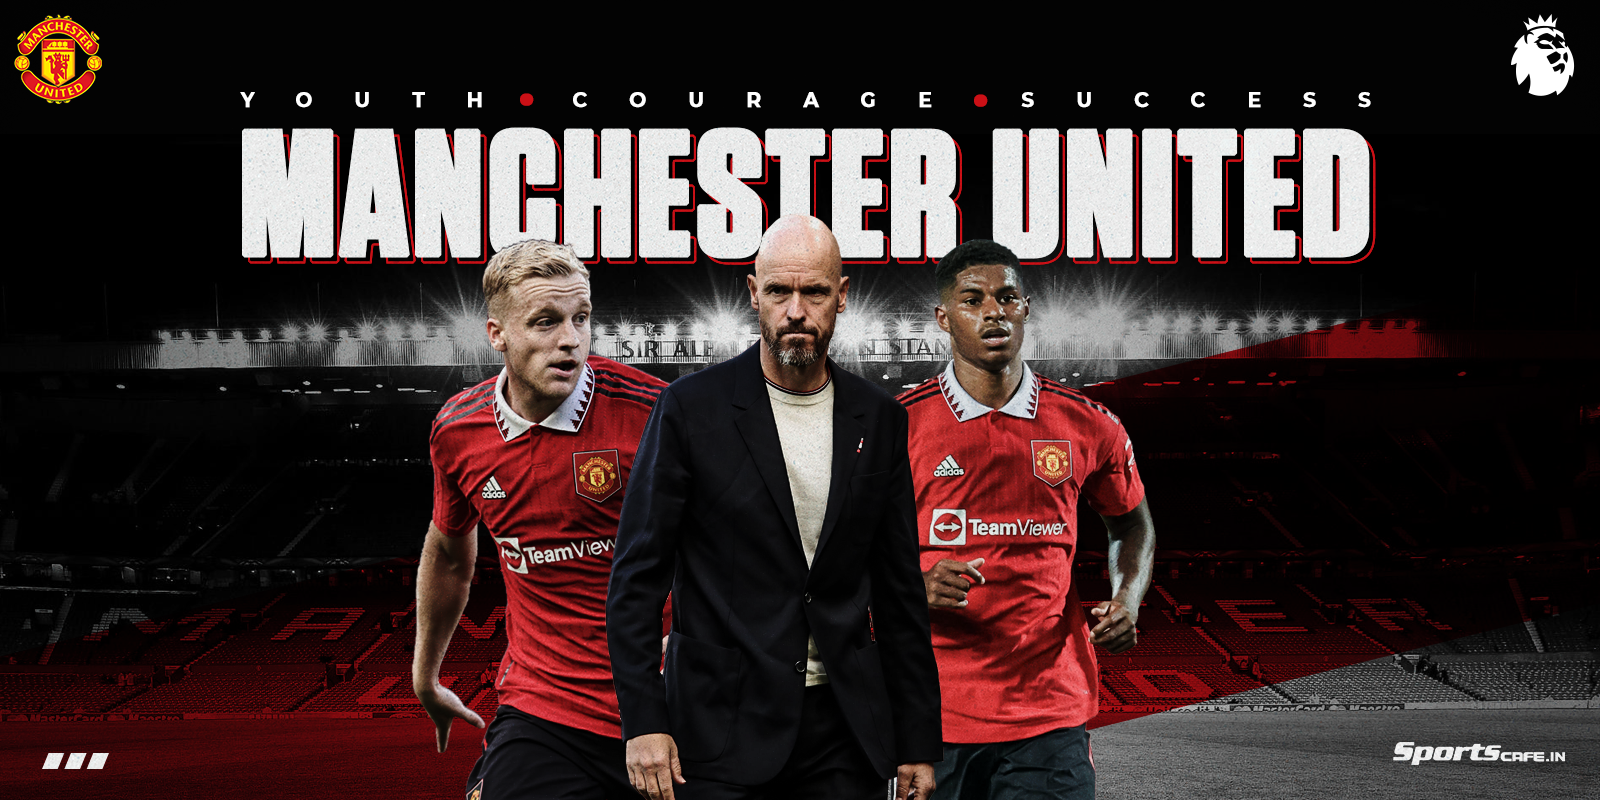 2022/23 Premier League Previews | Manchester United, Erik ten Hag and the rebirth of an English giant